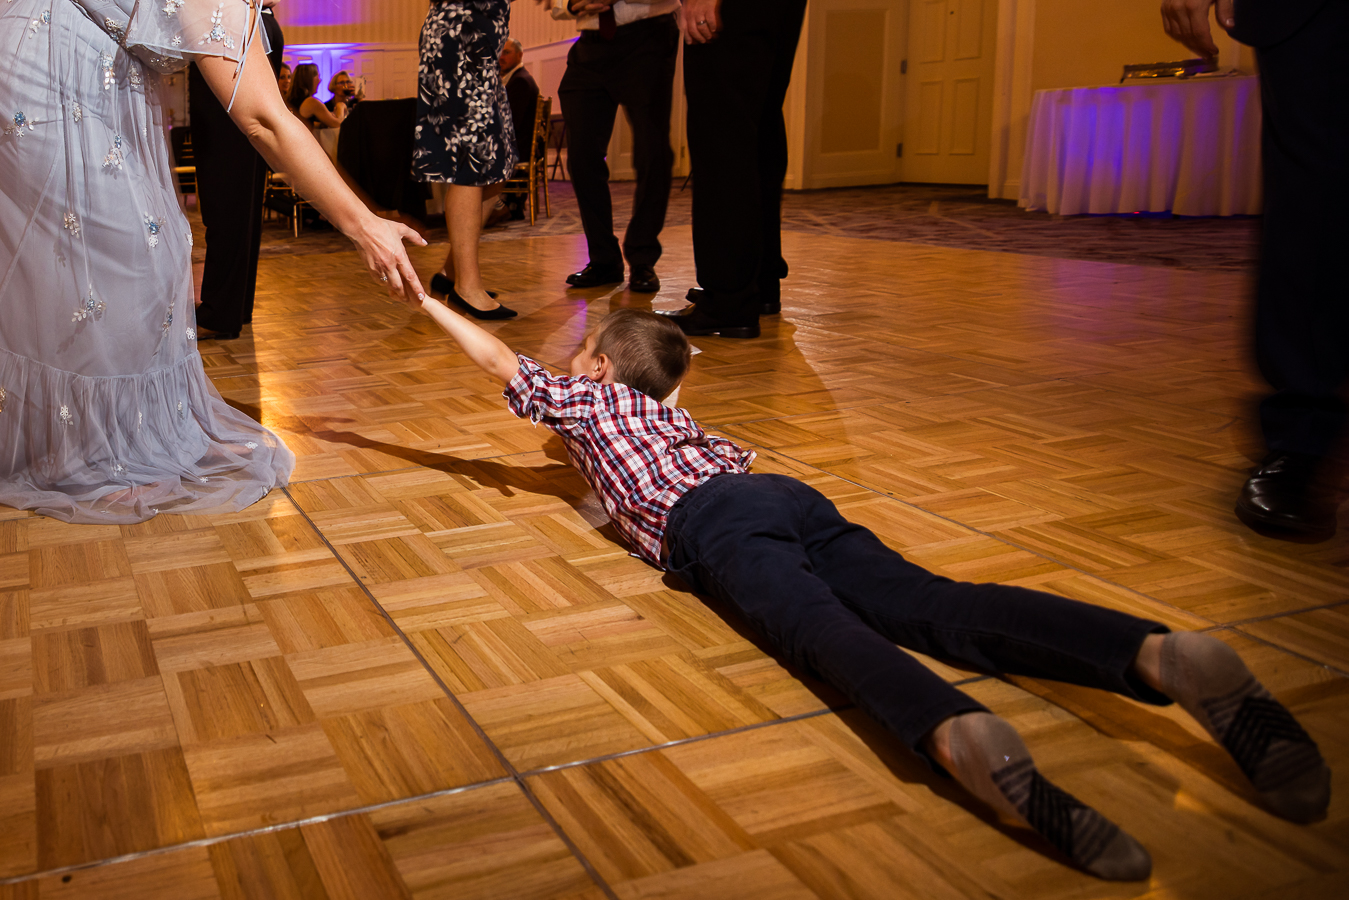 candid portrait photographer, lisa rhinehart, captures this moment of the young boy as he lays on the Gettysburg hotel dance floor and asks for help to stand up during this wedding reception 